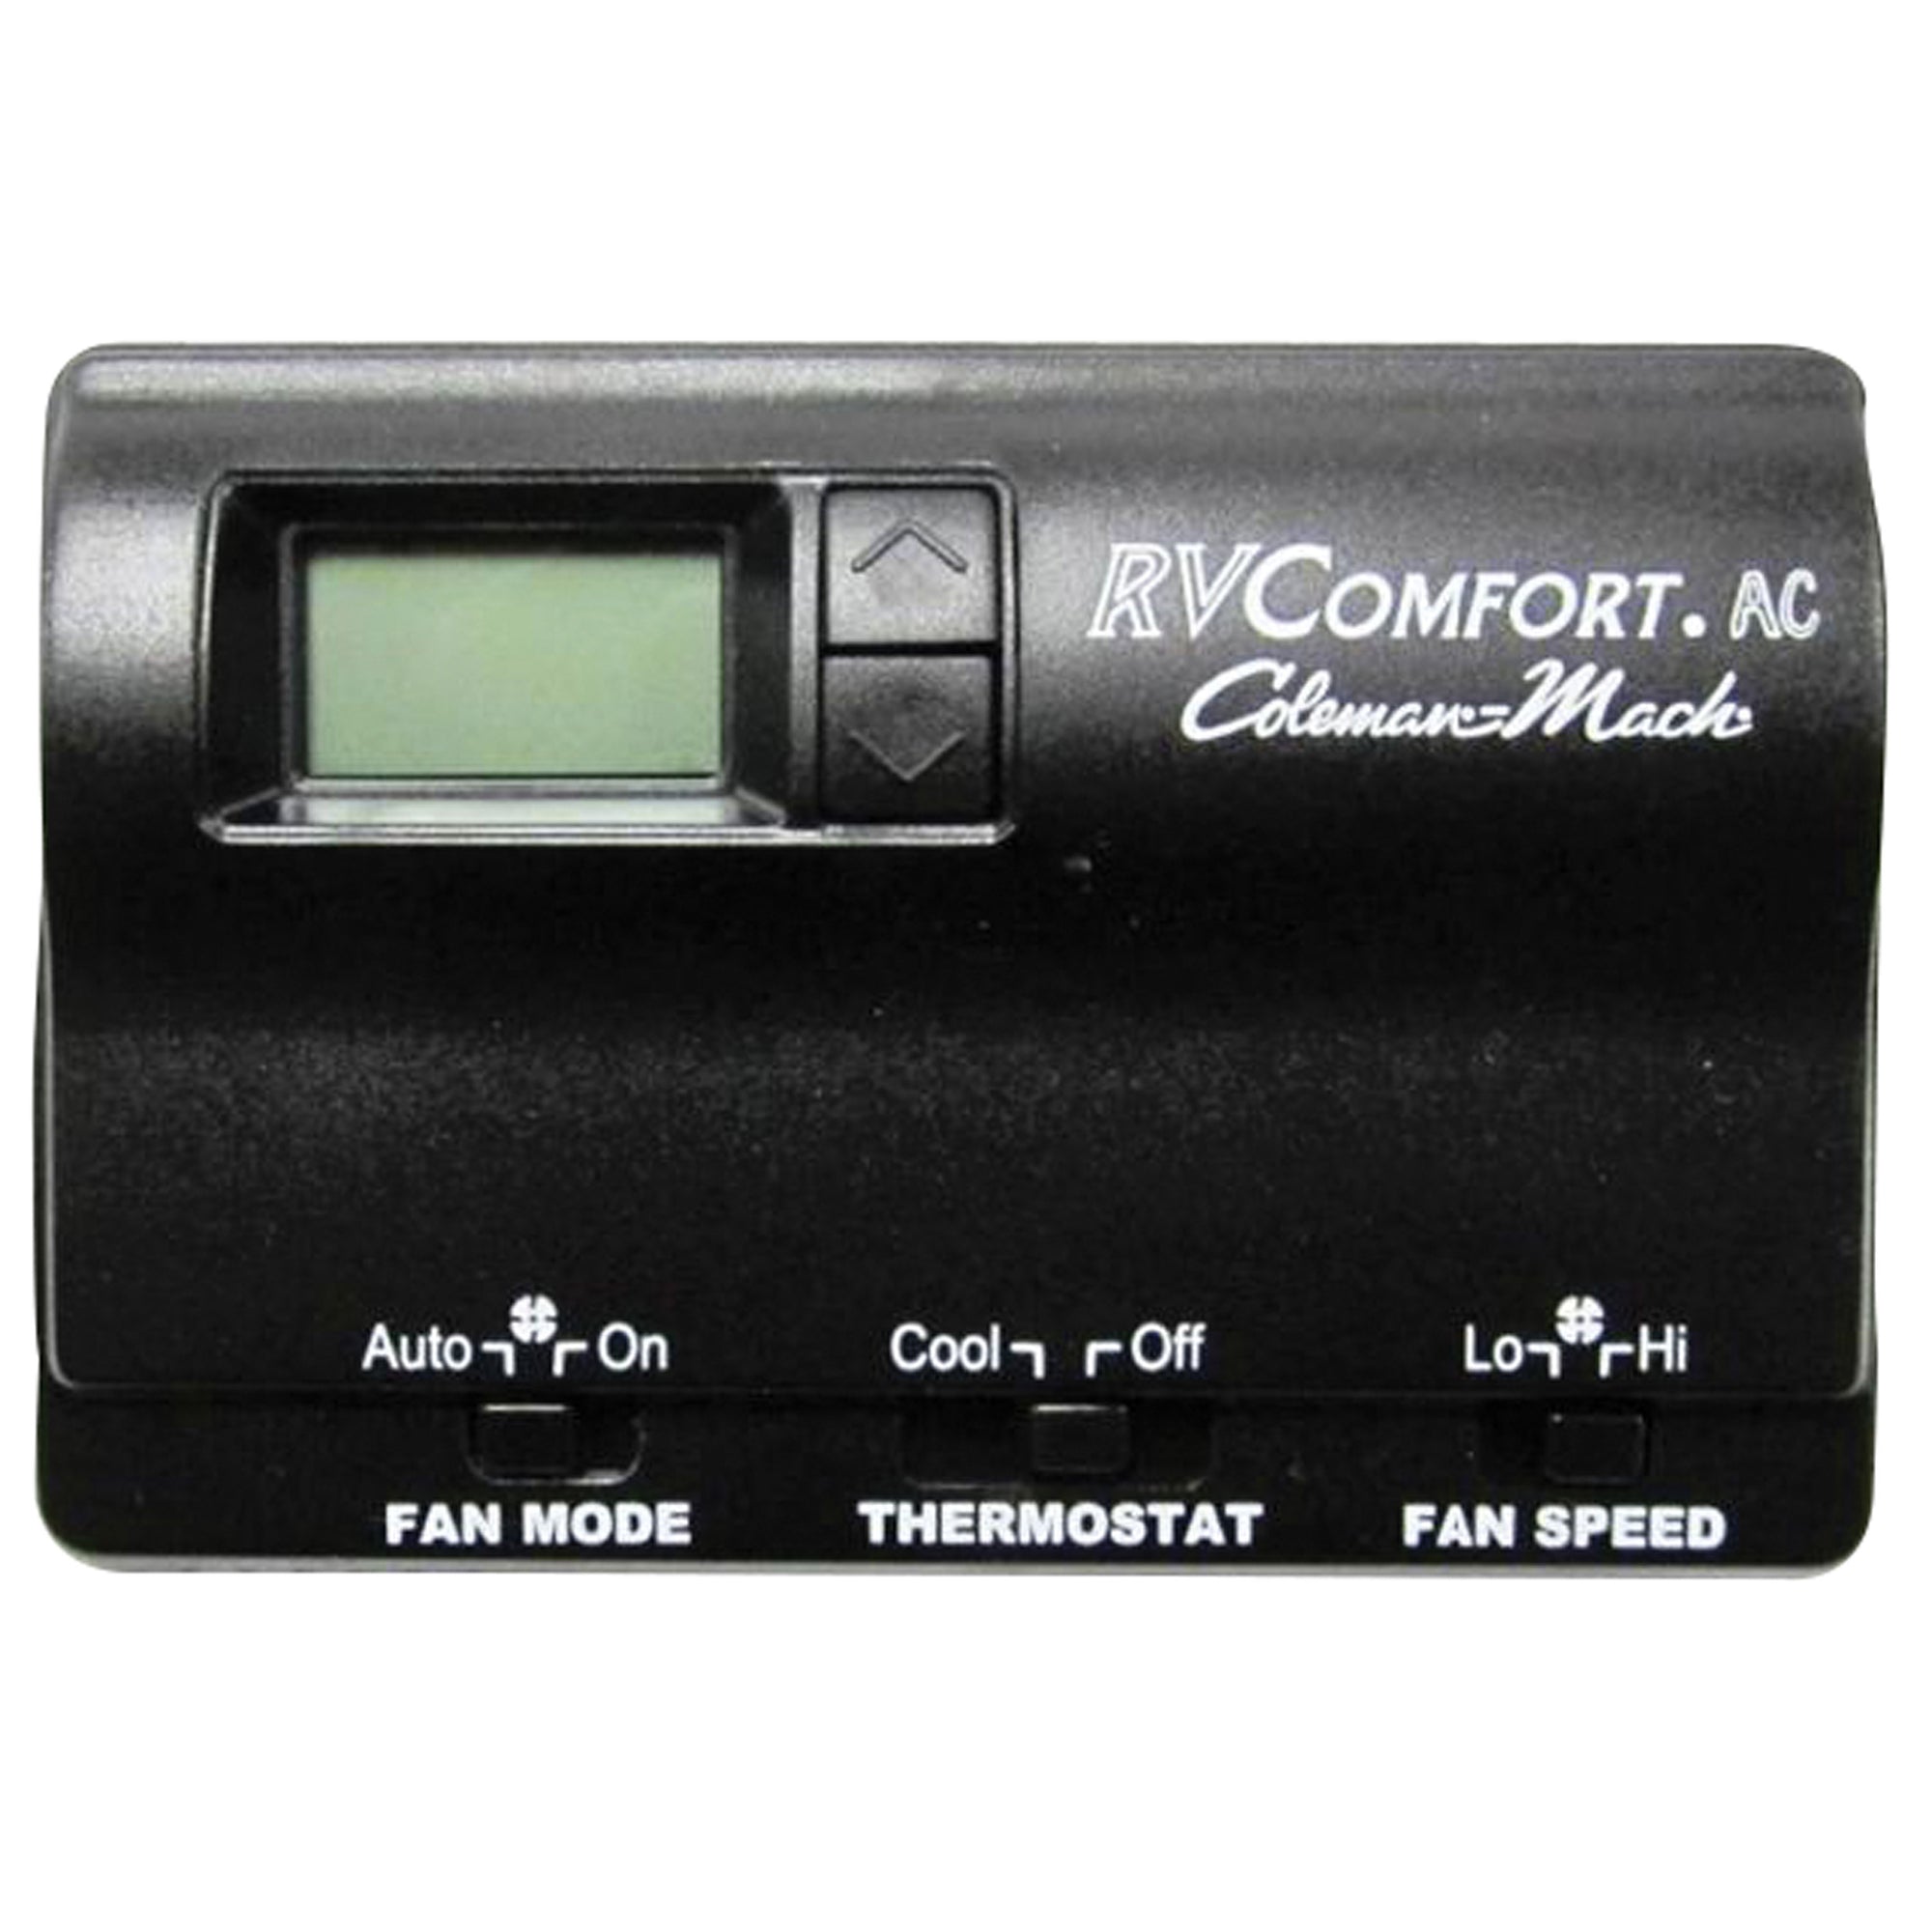 Coleman-Mach 8330-3462 Wall Mount Digital Thermostat - 12VDC, Cool Only, Plugs, Black